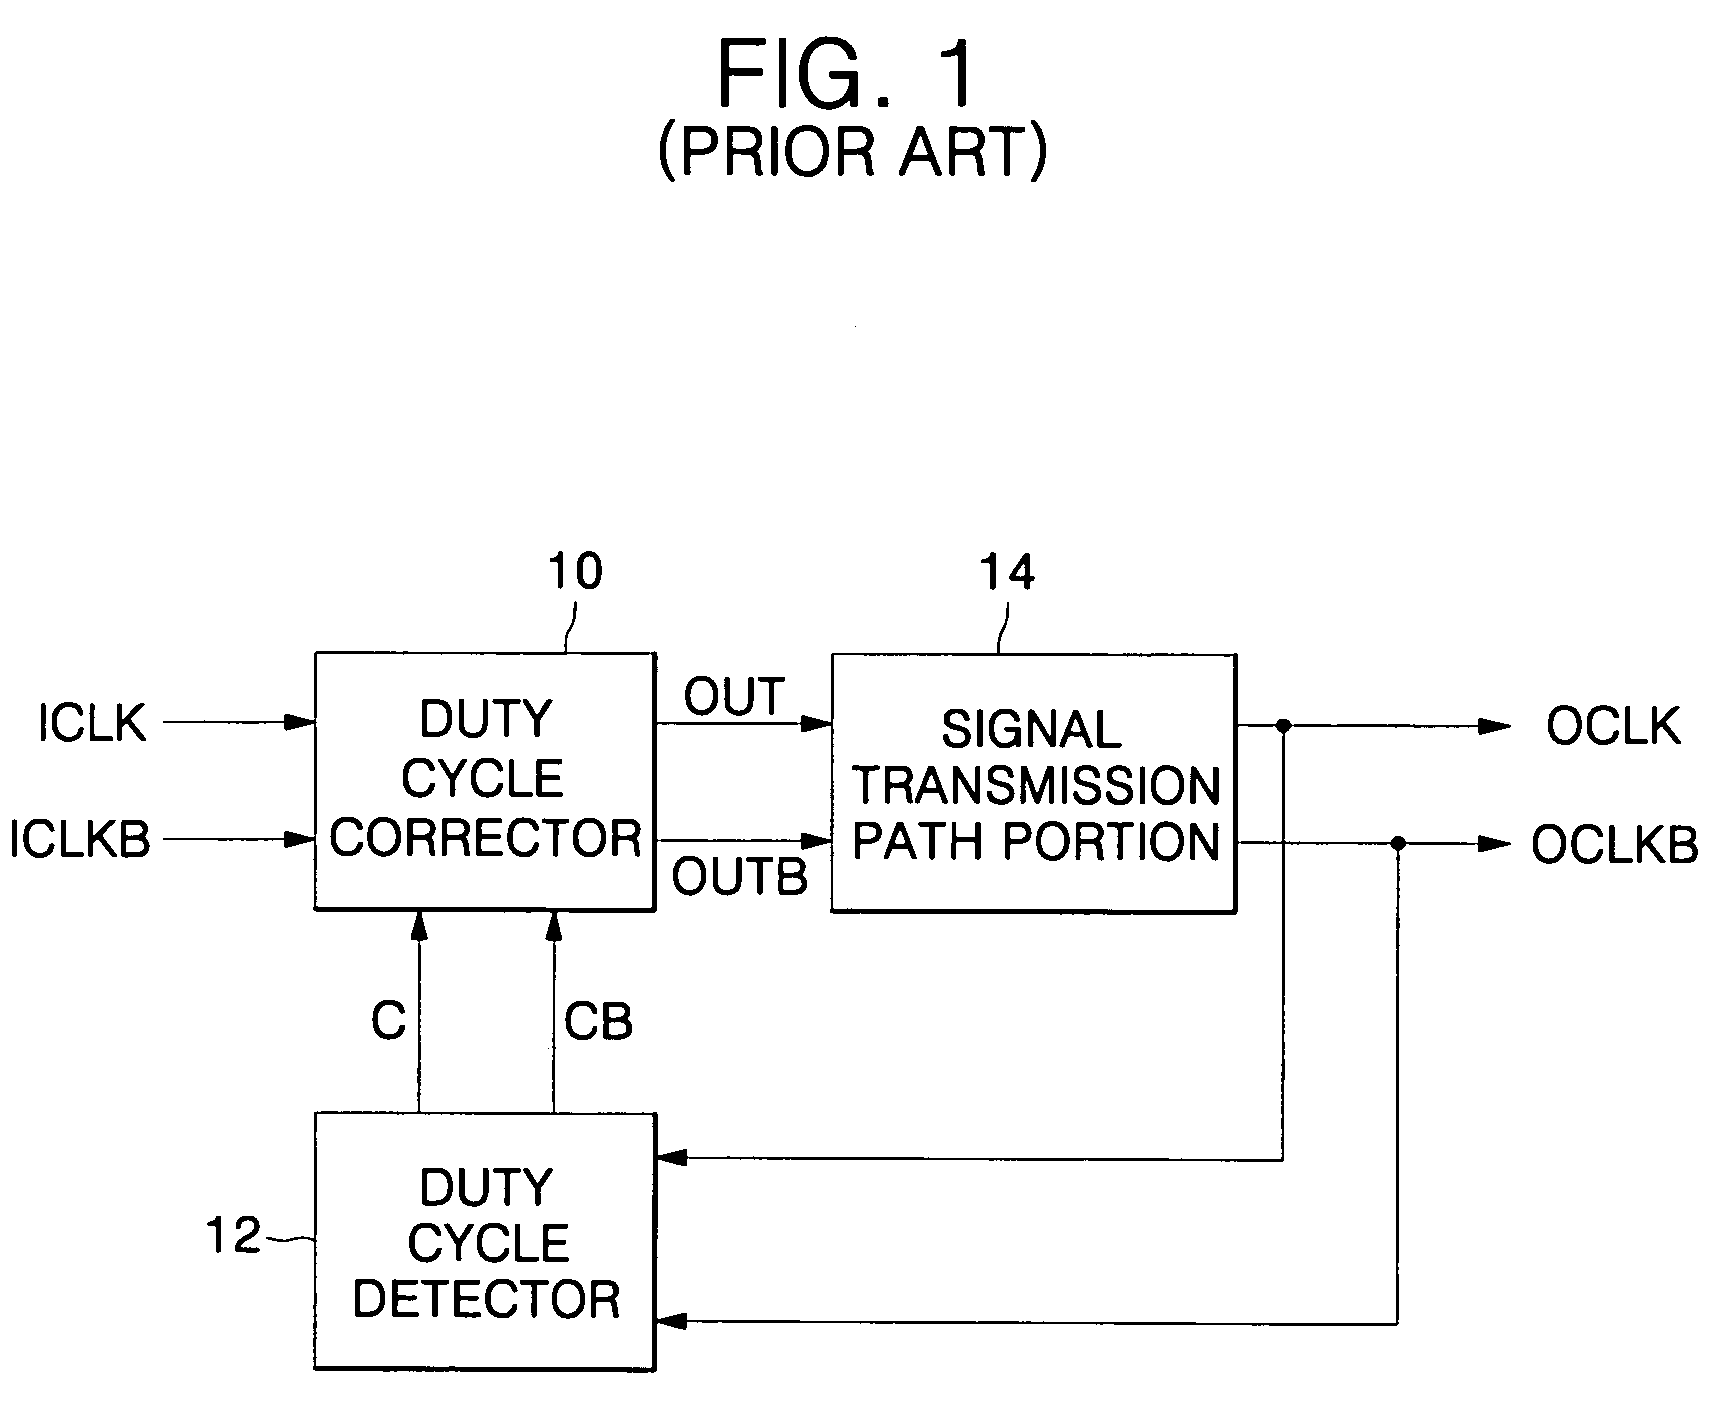 Duty cycle correcting circuits having a variable gain and methods of operating the same